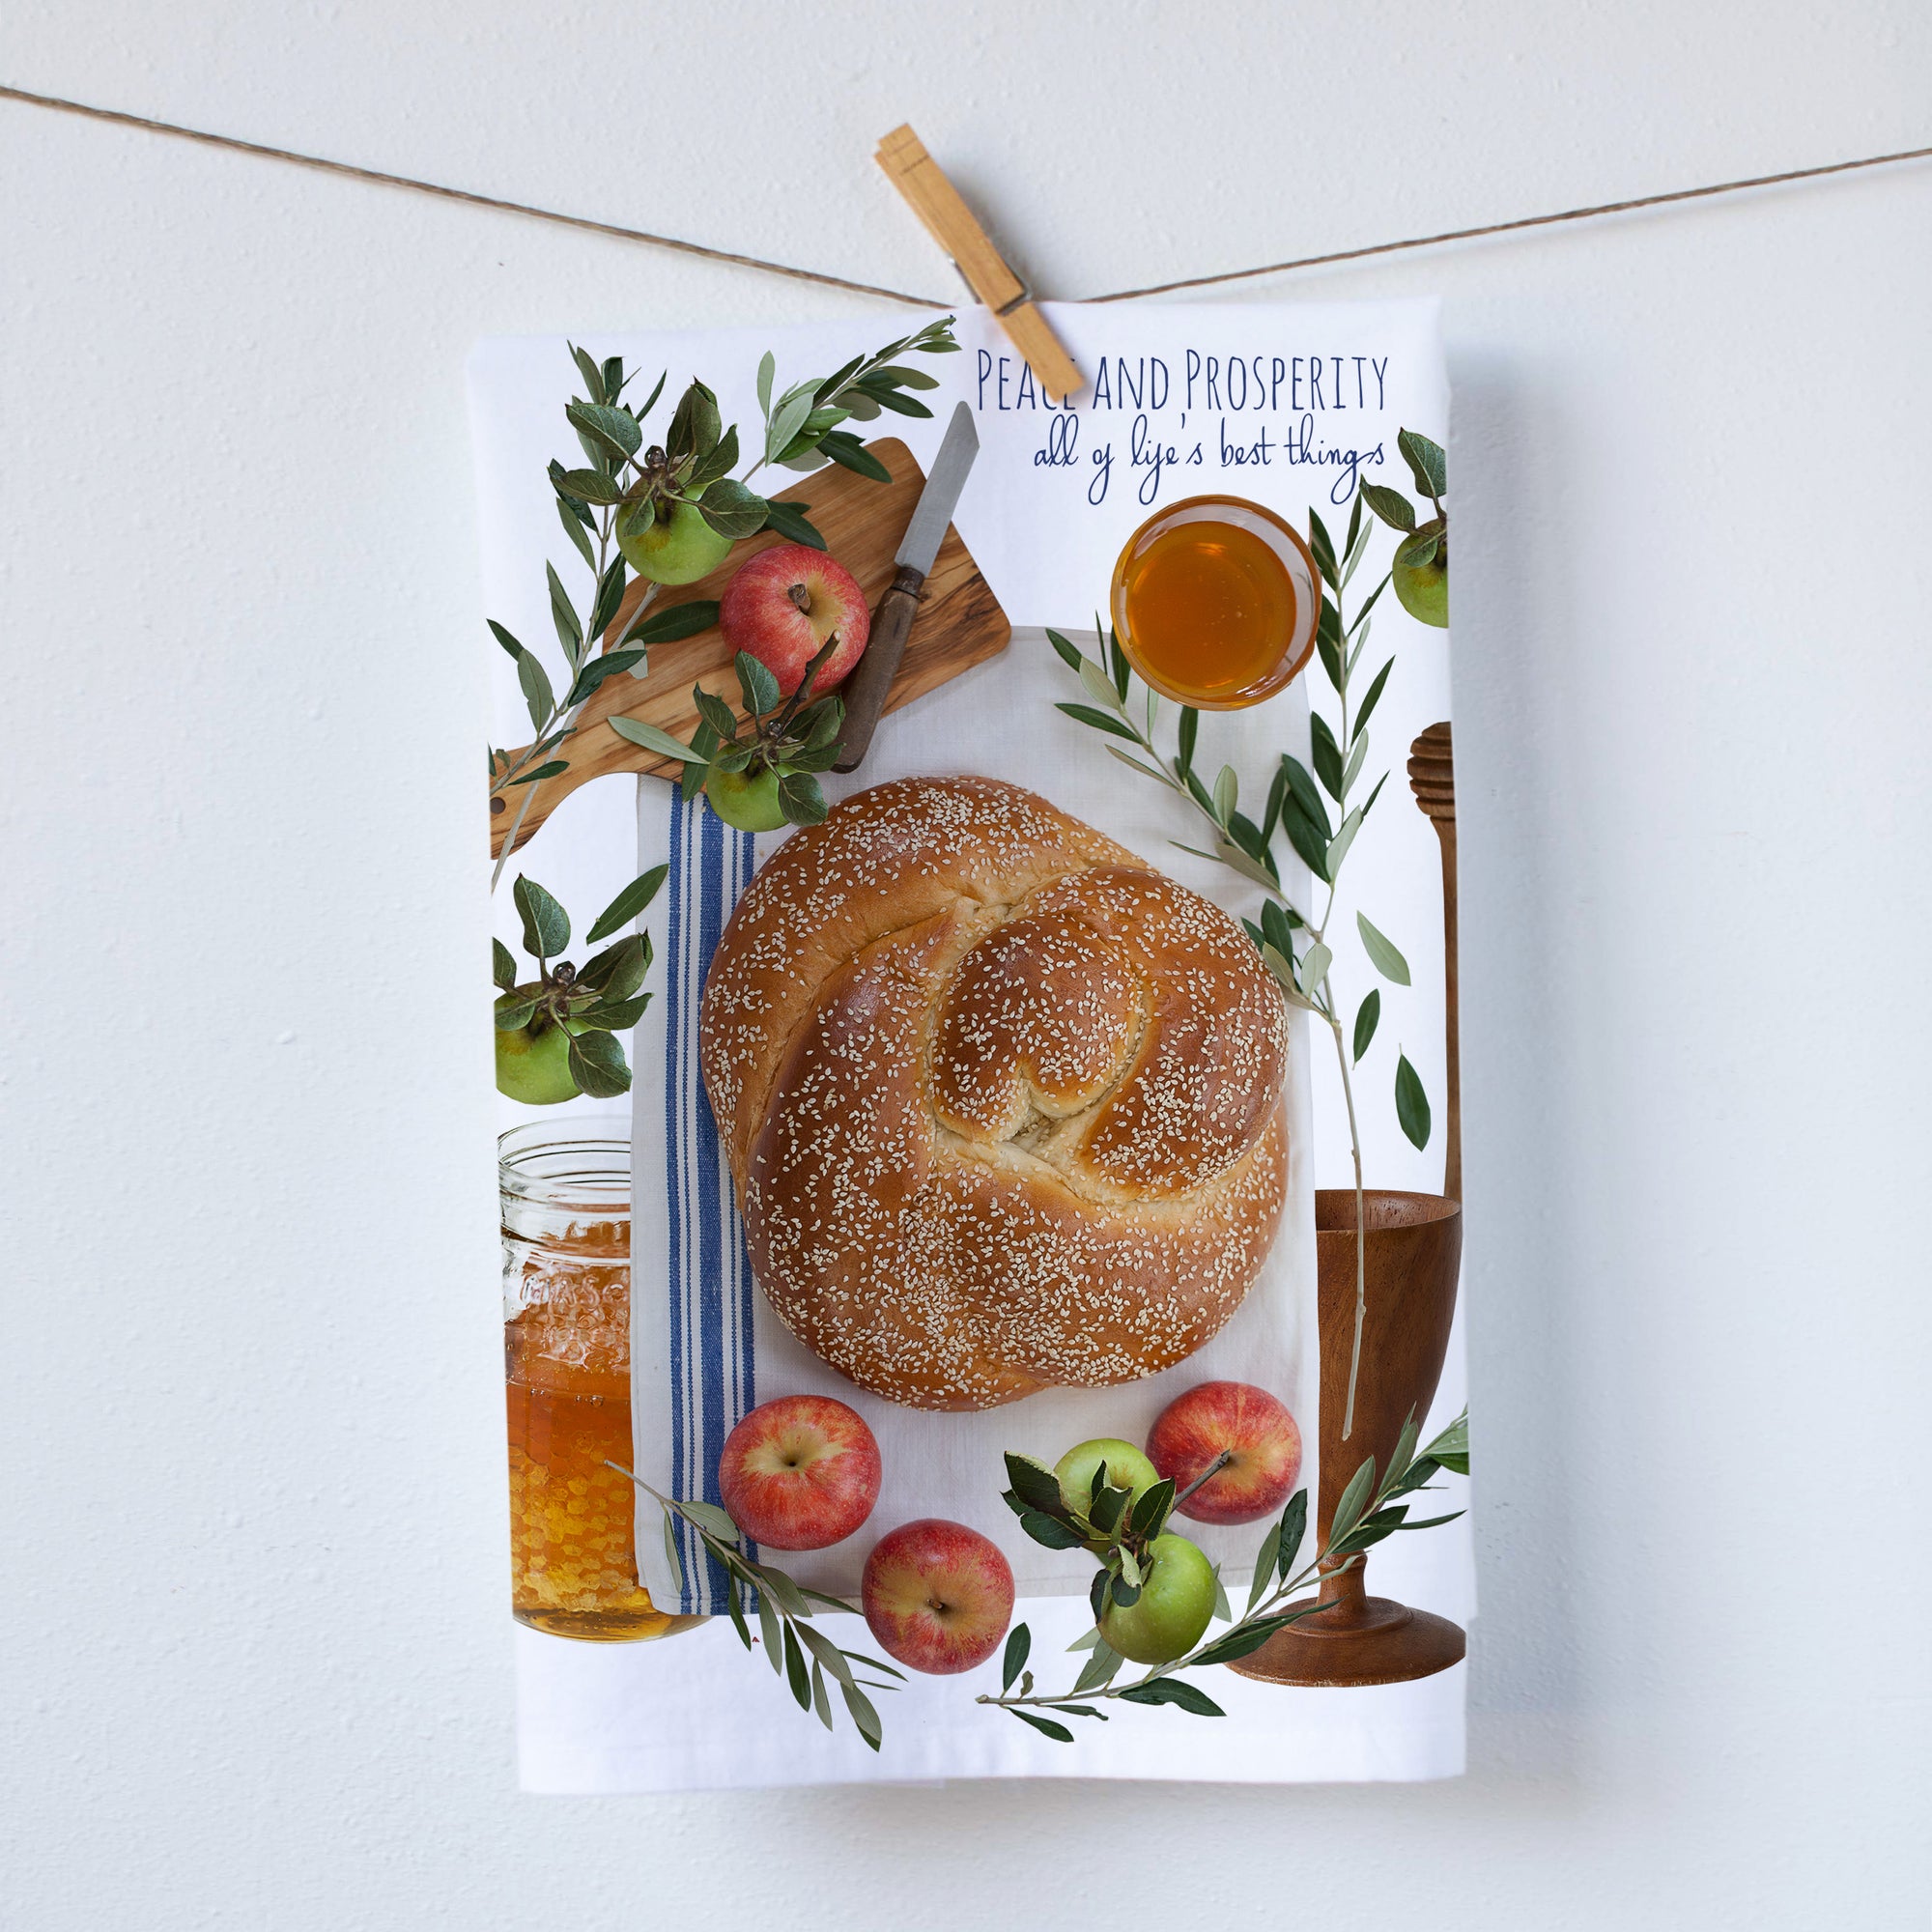 Peace and Prosperity kitchen towel. Bread as well as honey and red apples are shown. Reflecting prosperity and peace. Photos by Pauline Stevens. Hostess gift, 19" x 29" (8101785537)